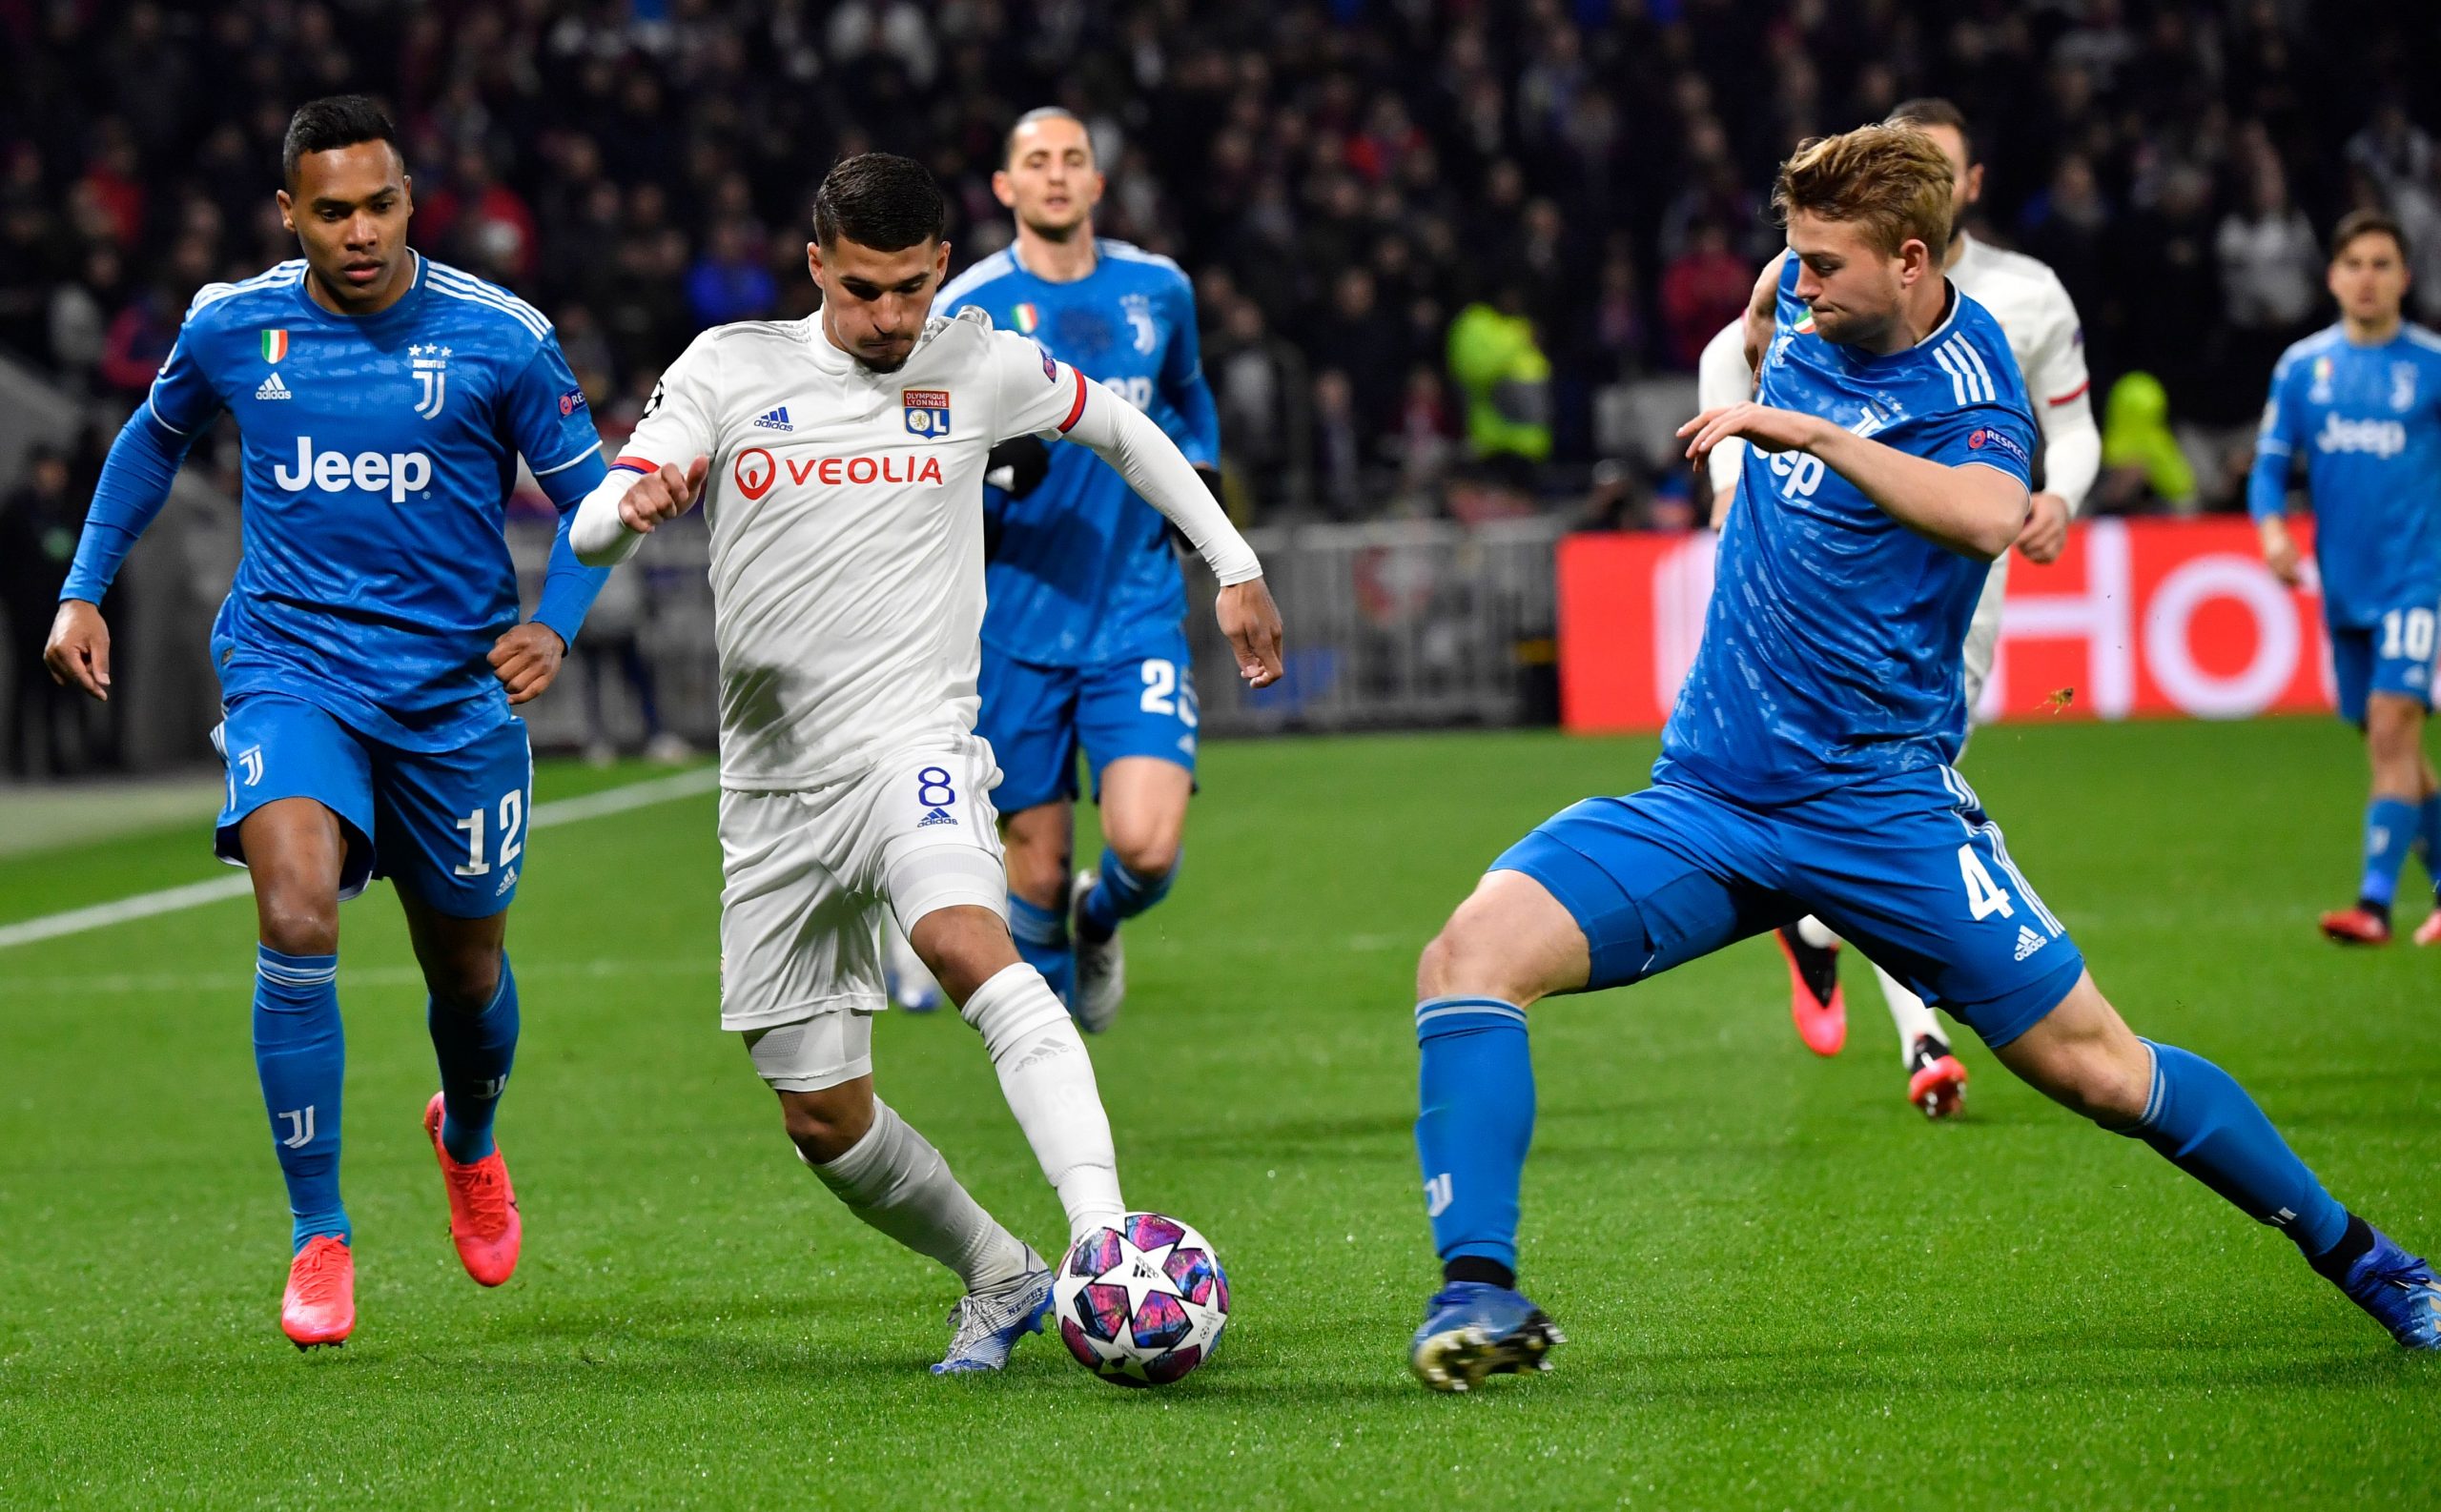 Manchester City eyeing a summer move for Houssem Aouar who is in action in the photo